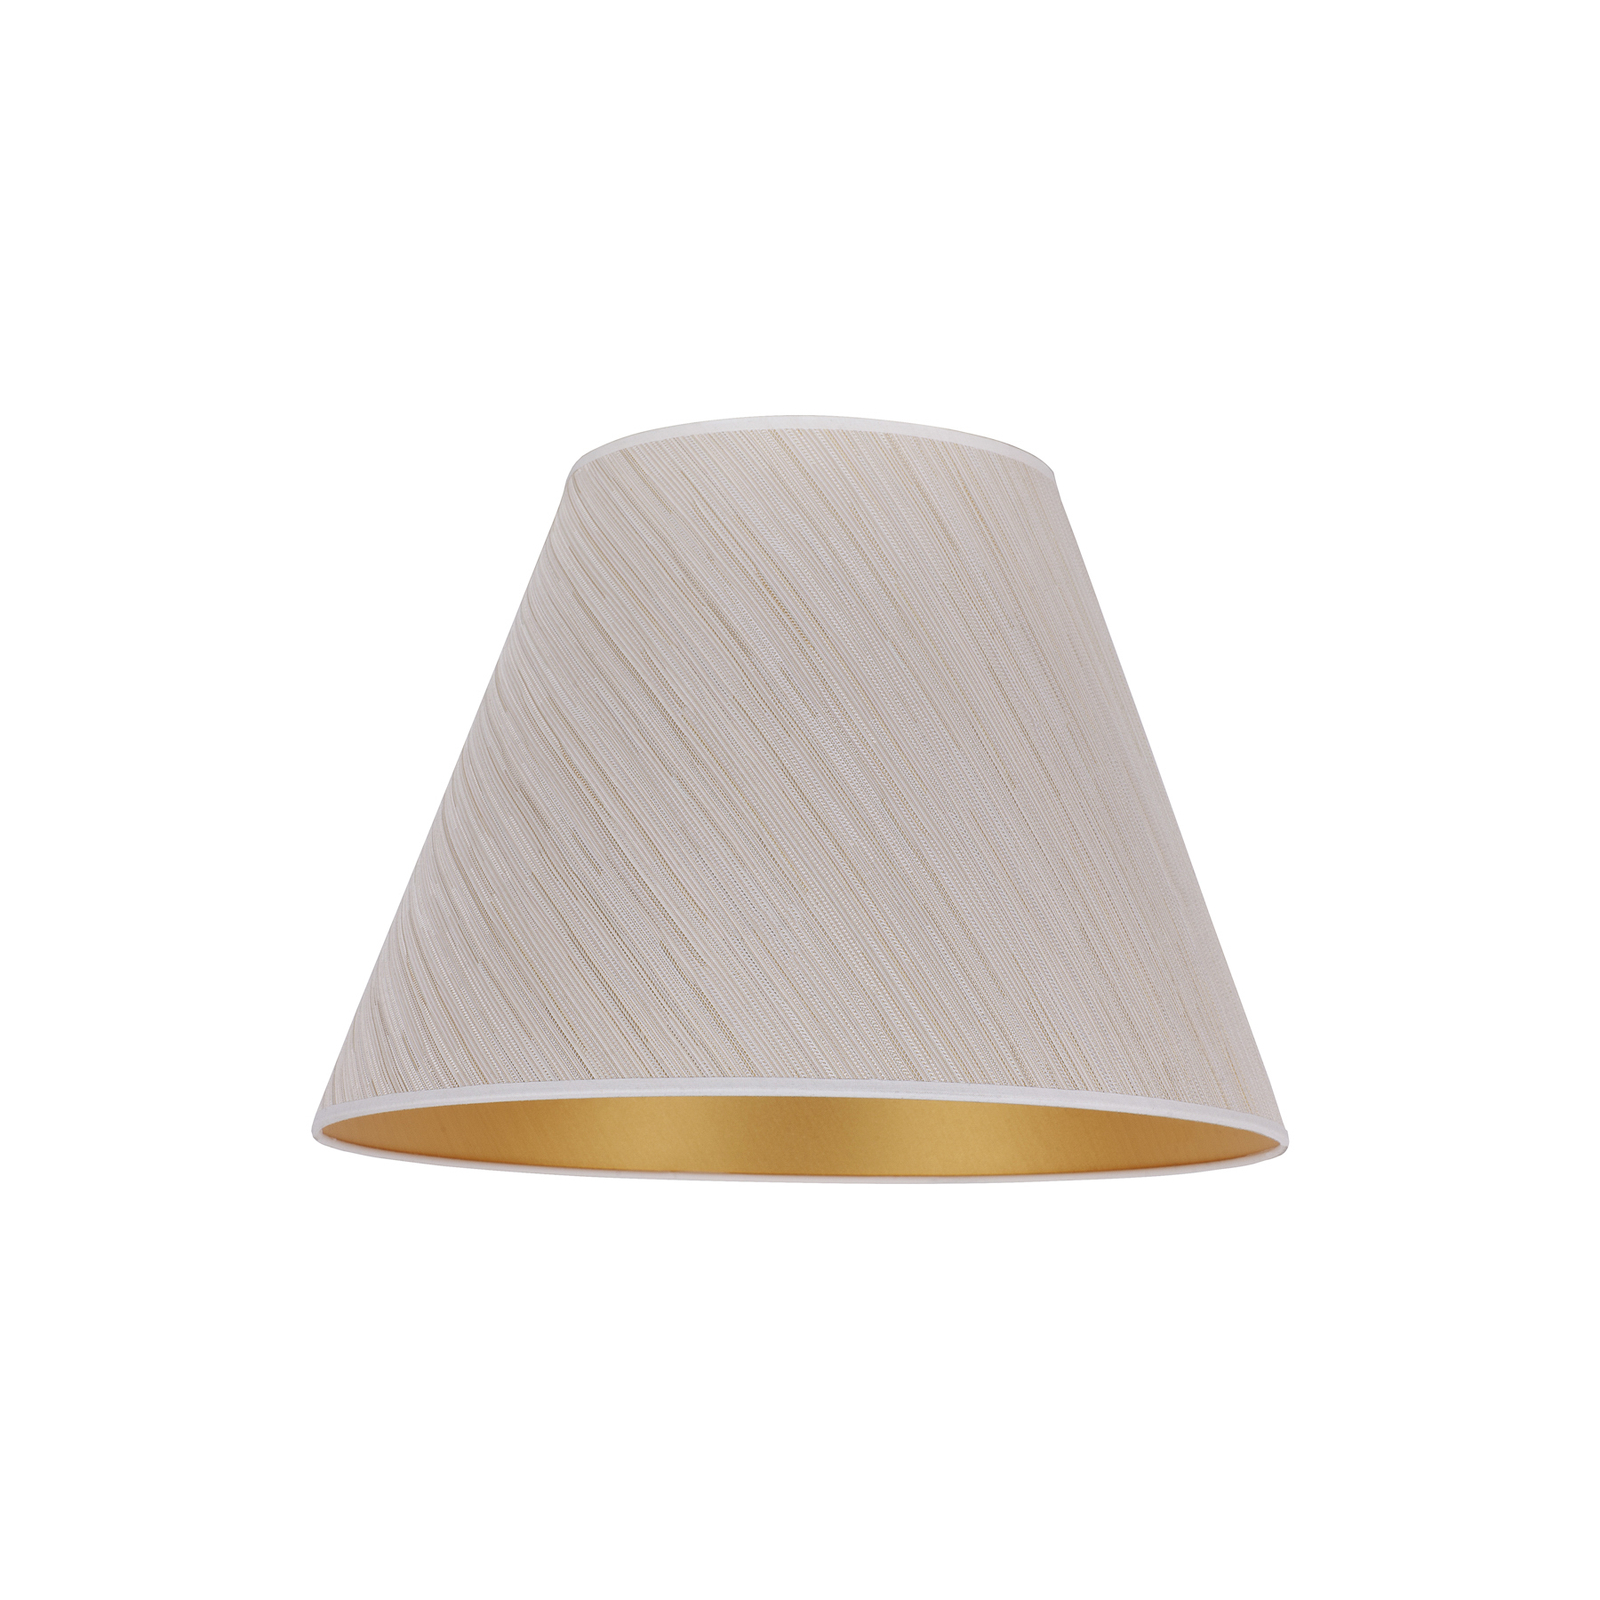 Sofia lampshade height 26 cm, white/gold striped